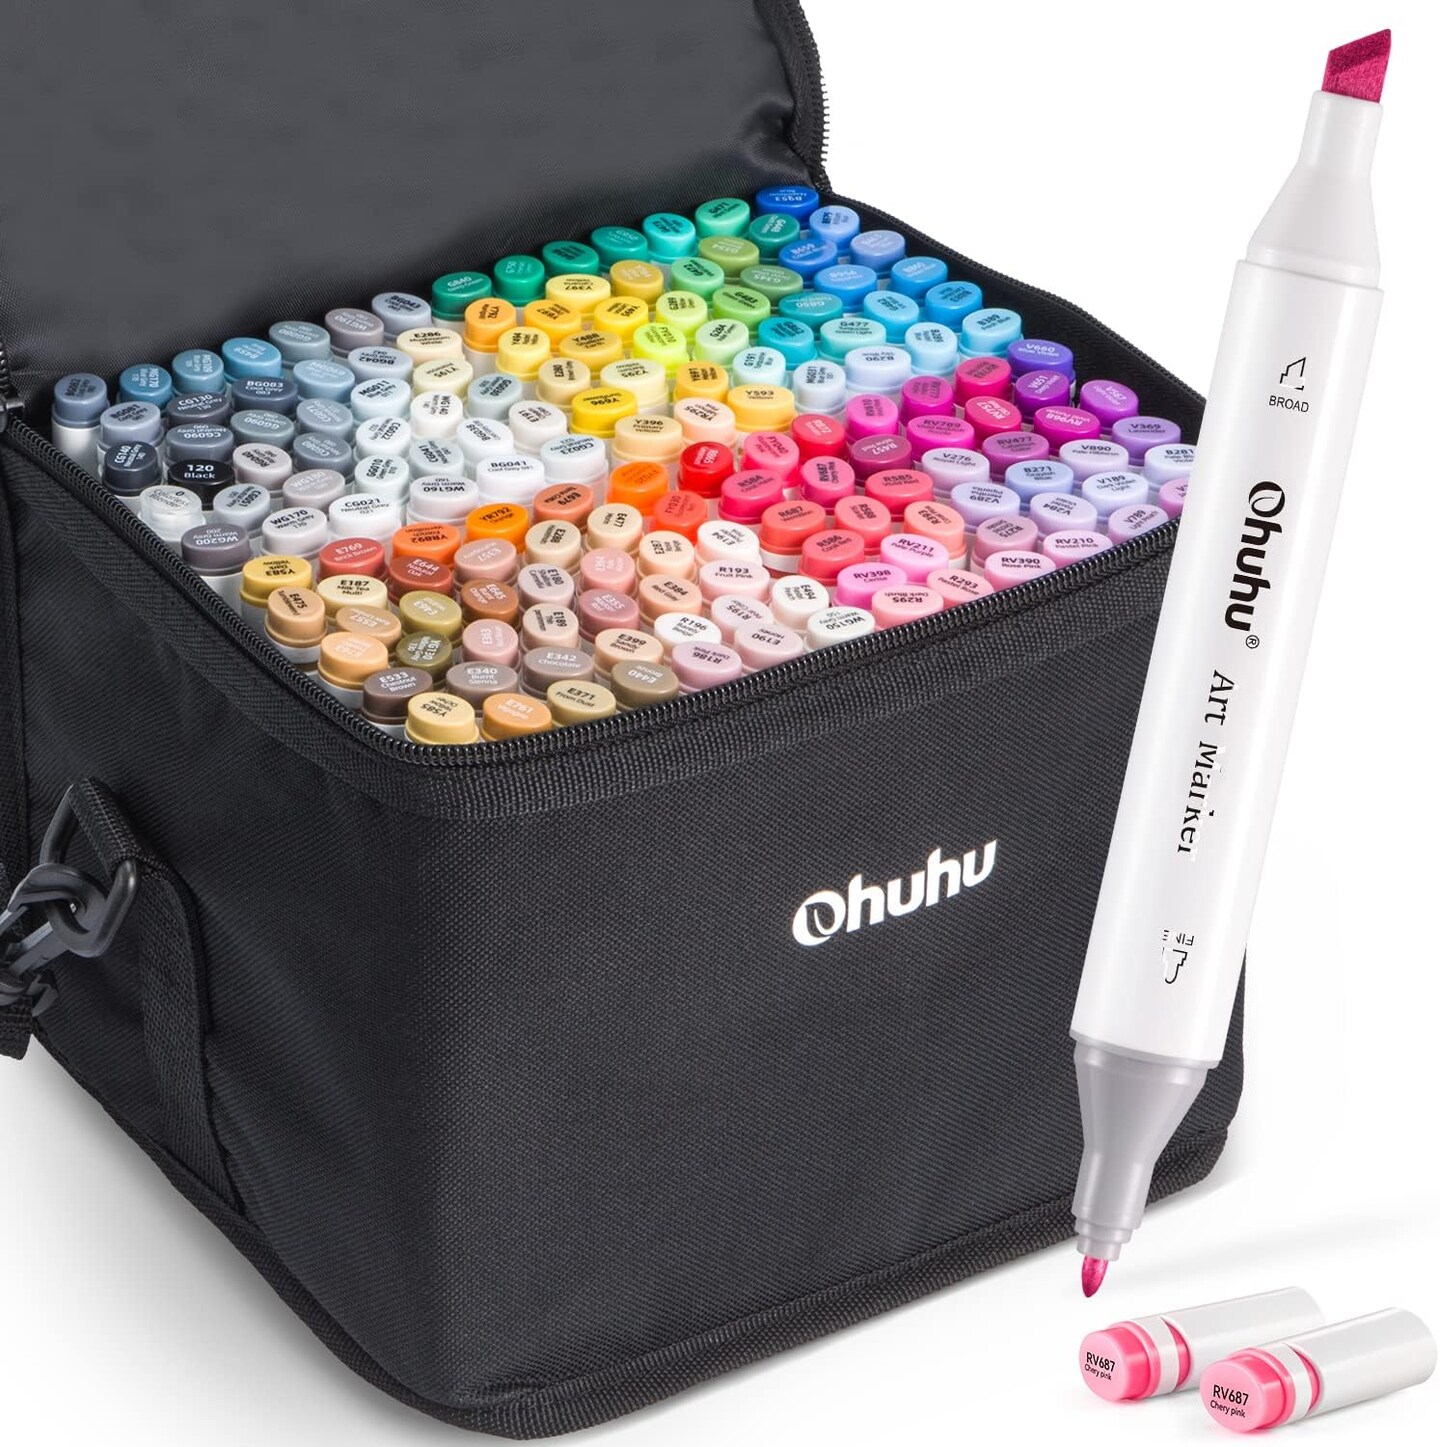 Ohuhu 160 Colors Alcohol Markers Art Supplies for Drawing Sketching - Chisel &#x26; Fine Dual Tips - Oahu Markers